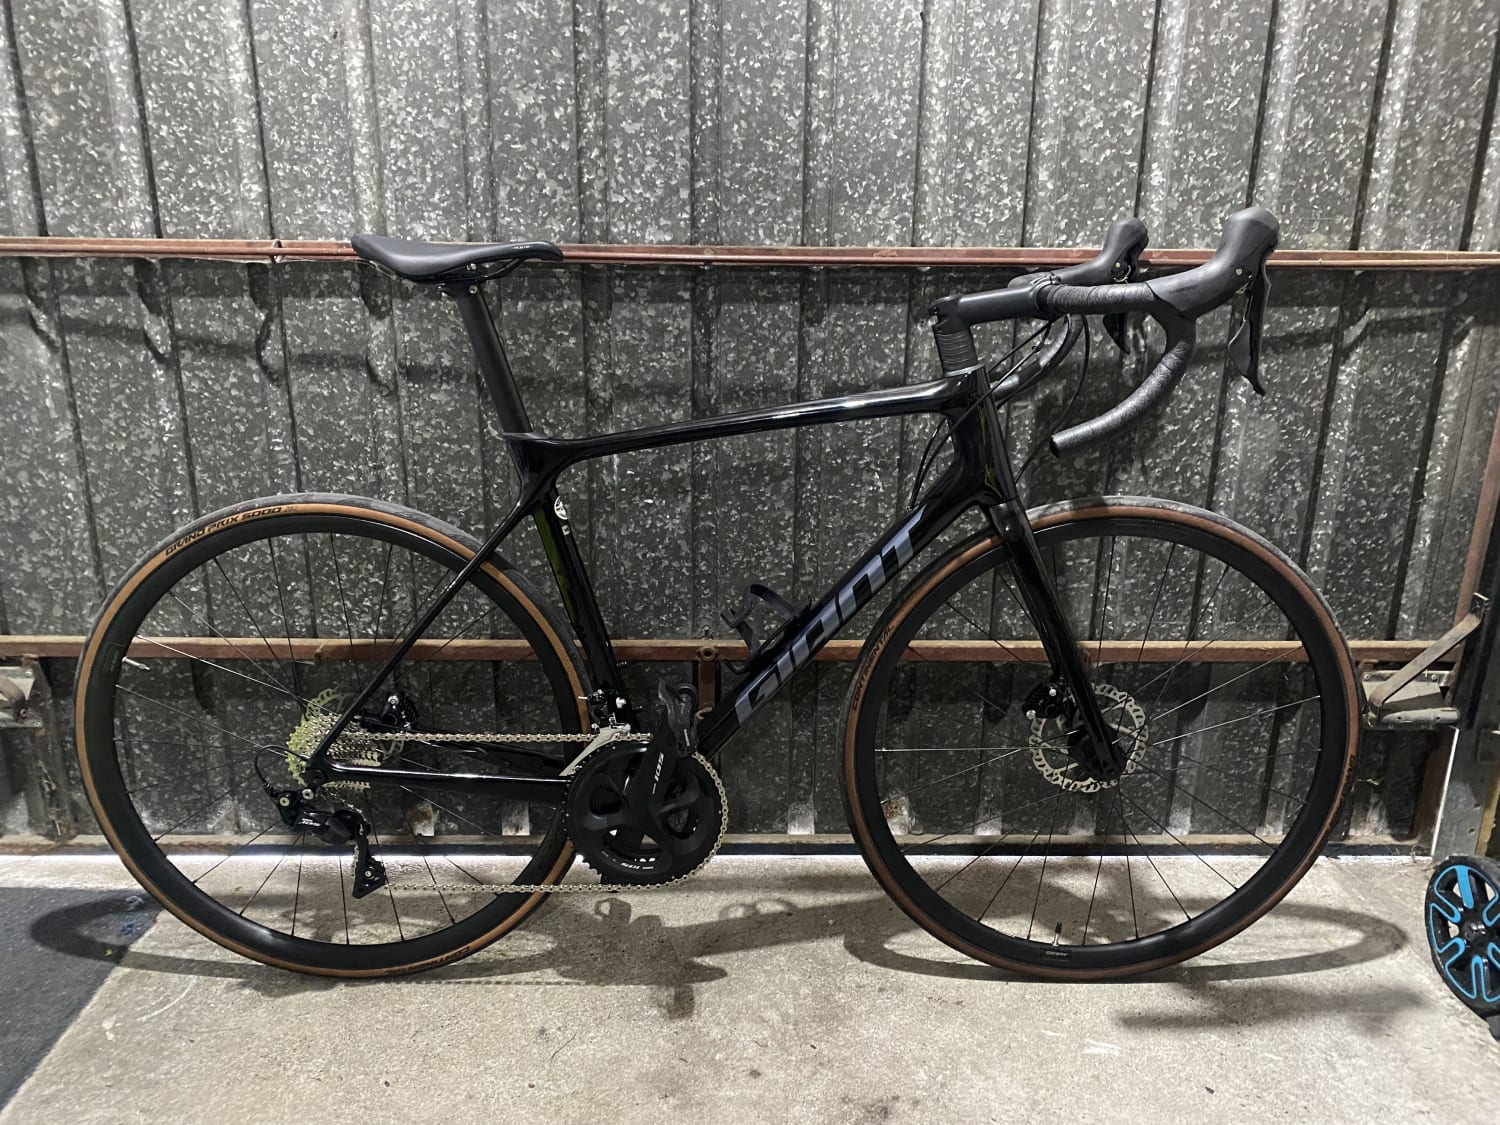 [NBD] First carbon bike. Need to play around with the stem height